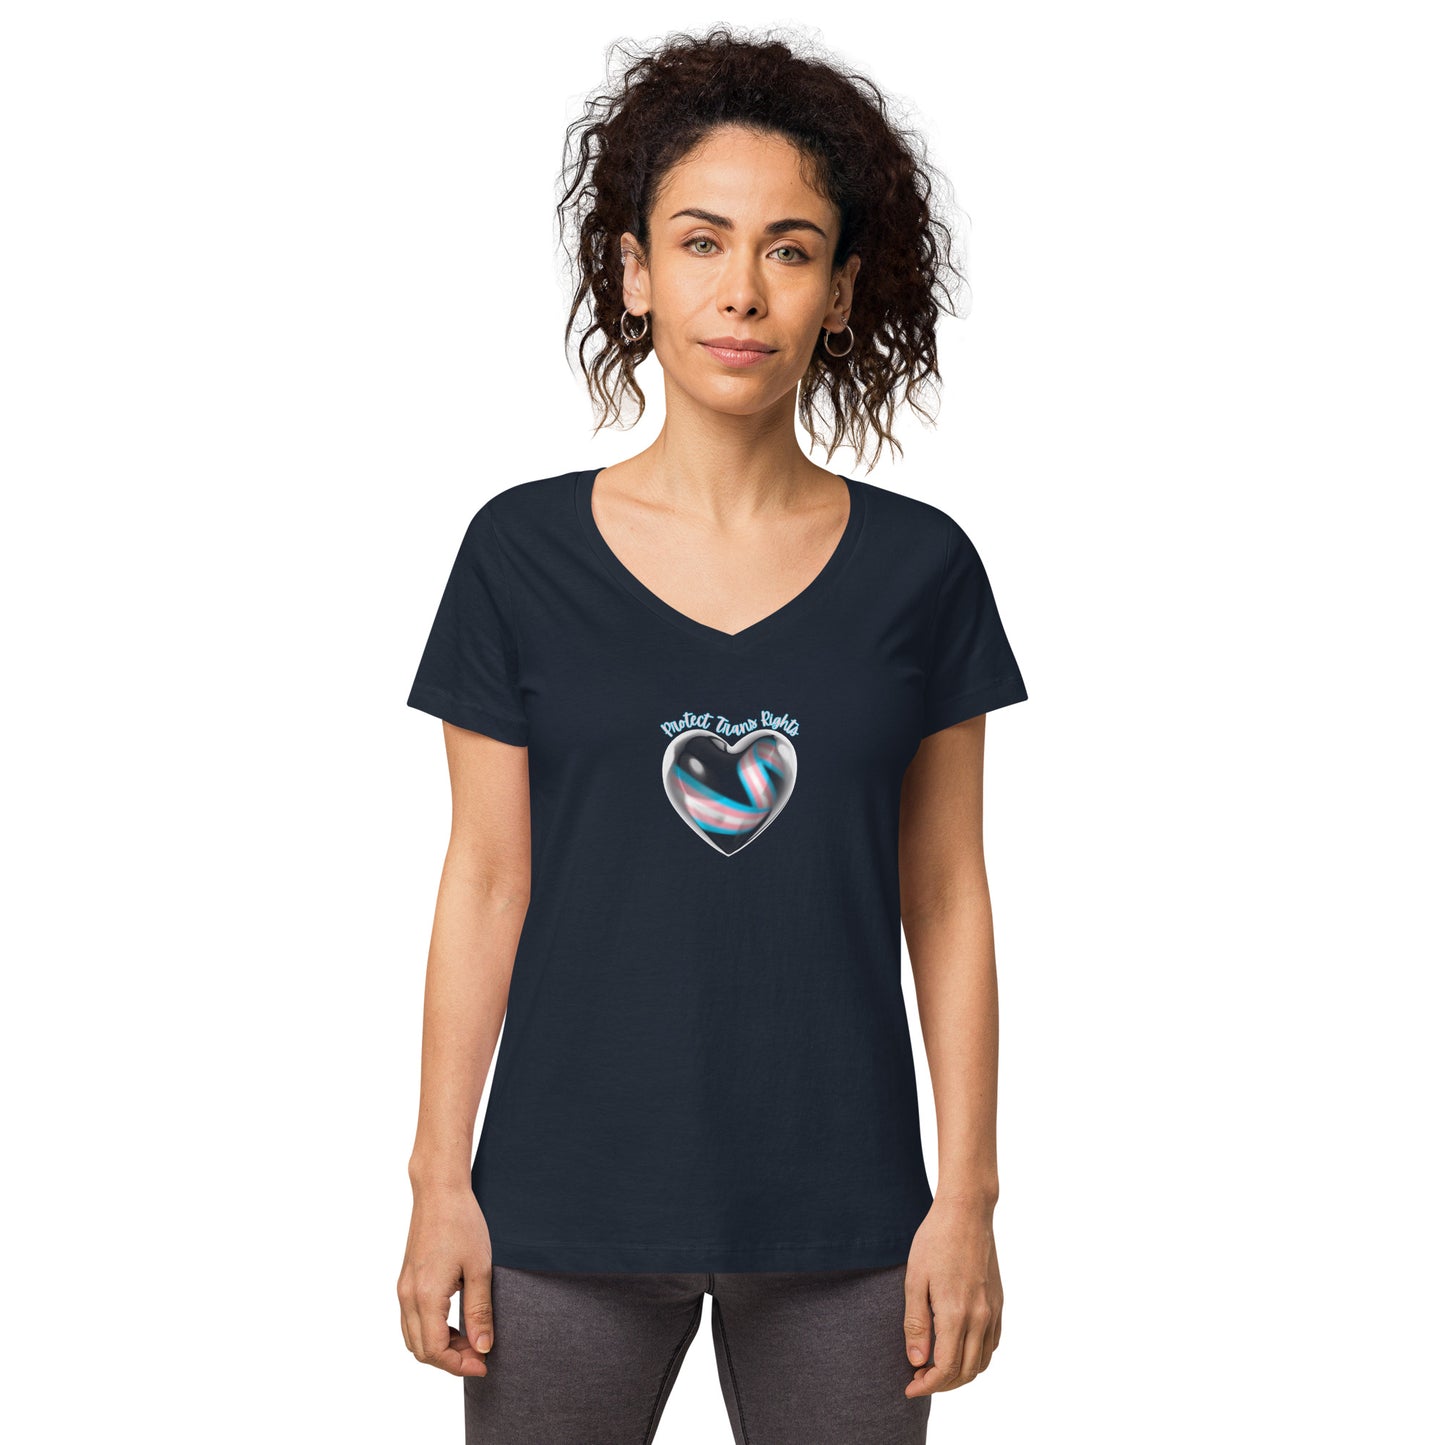 Protect Trans Rights - Women’s fitted v-neck t-shirt